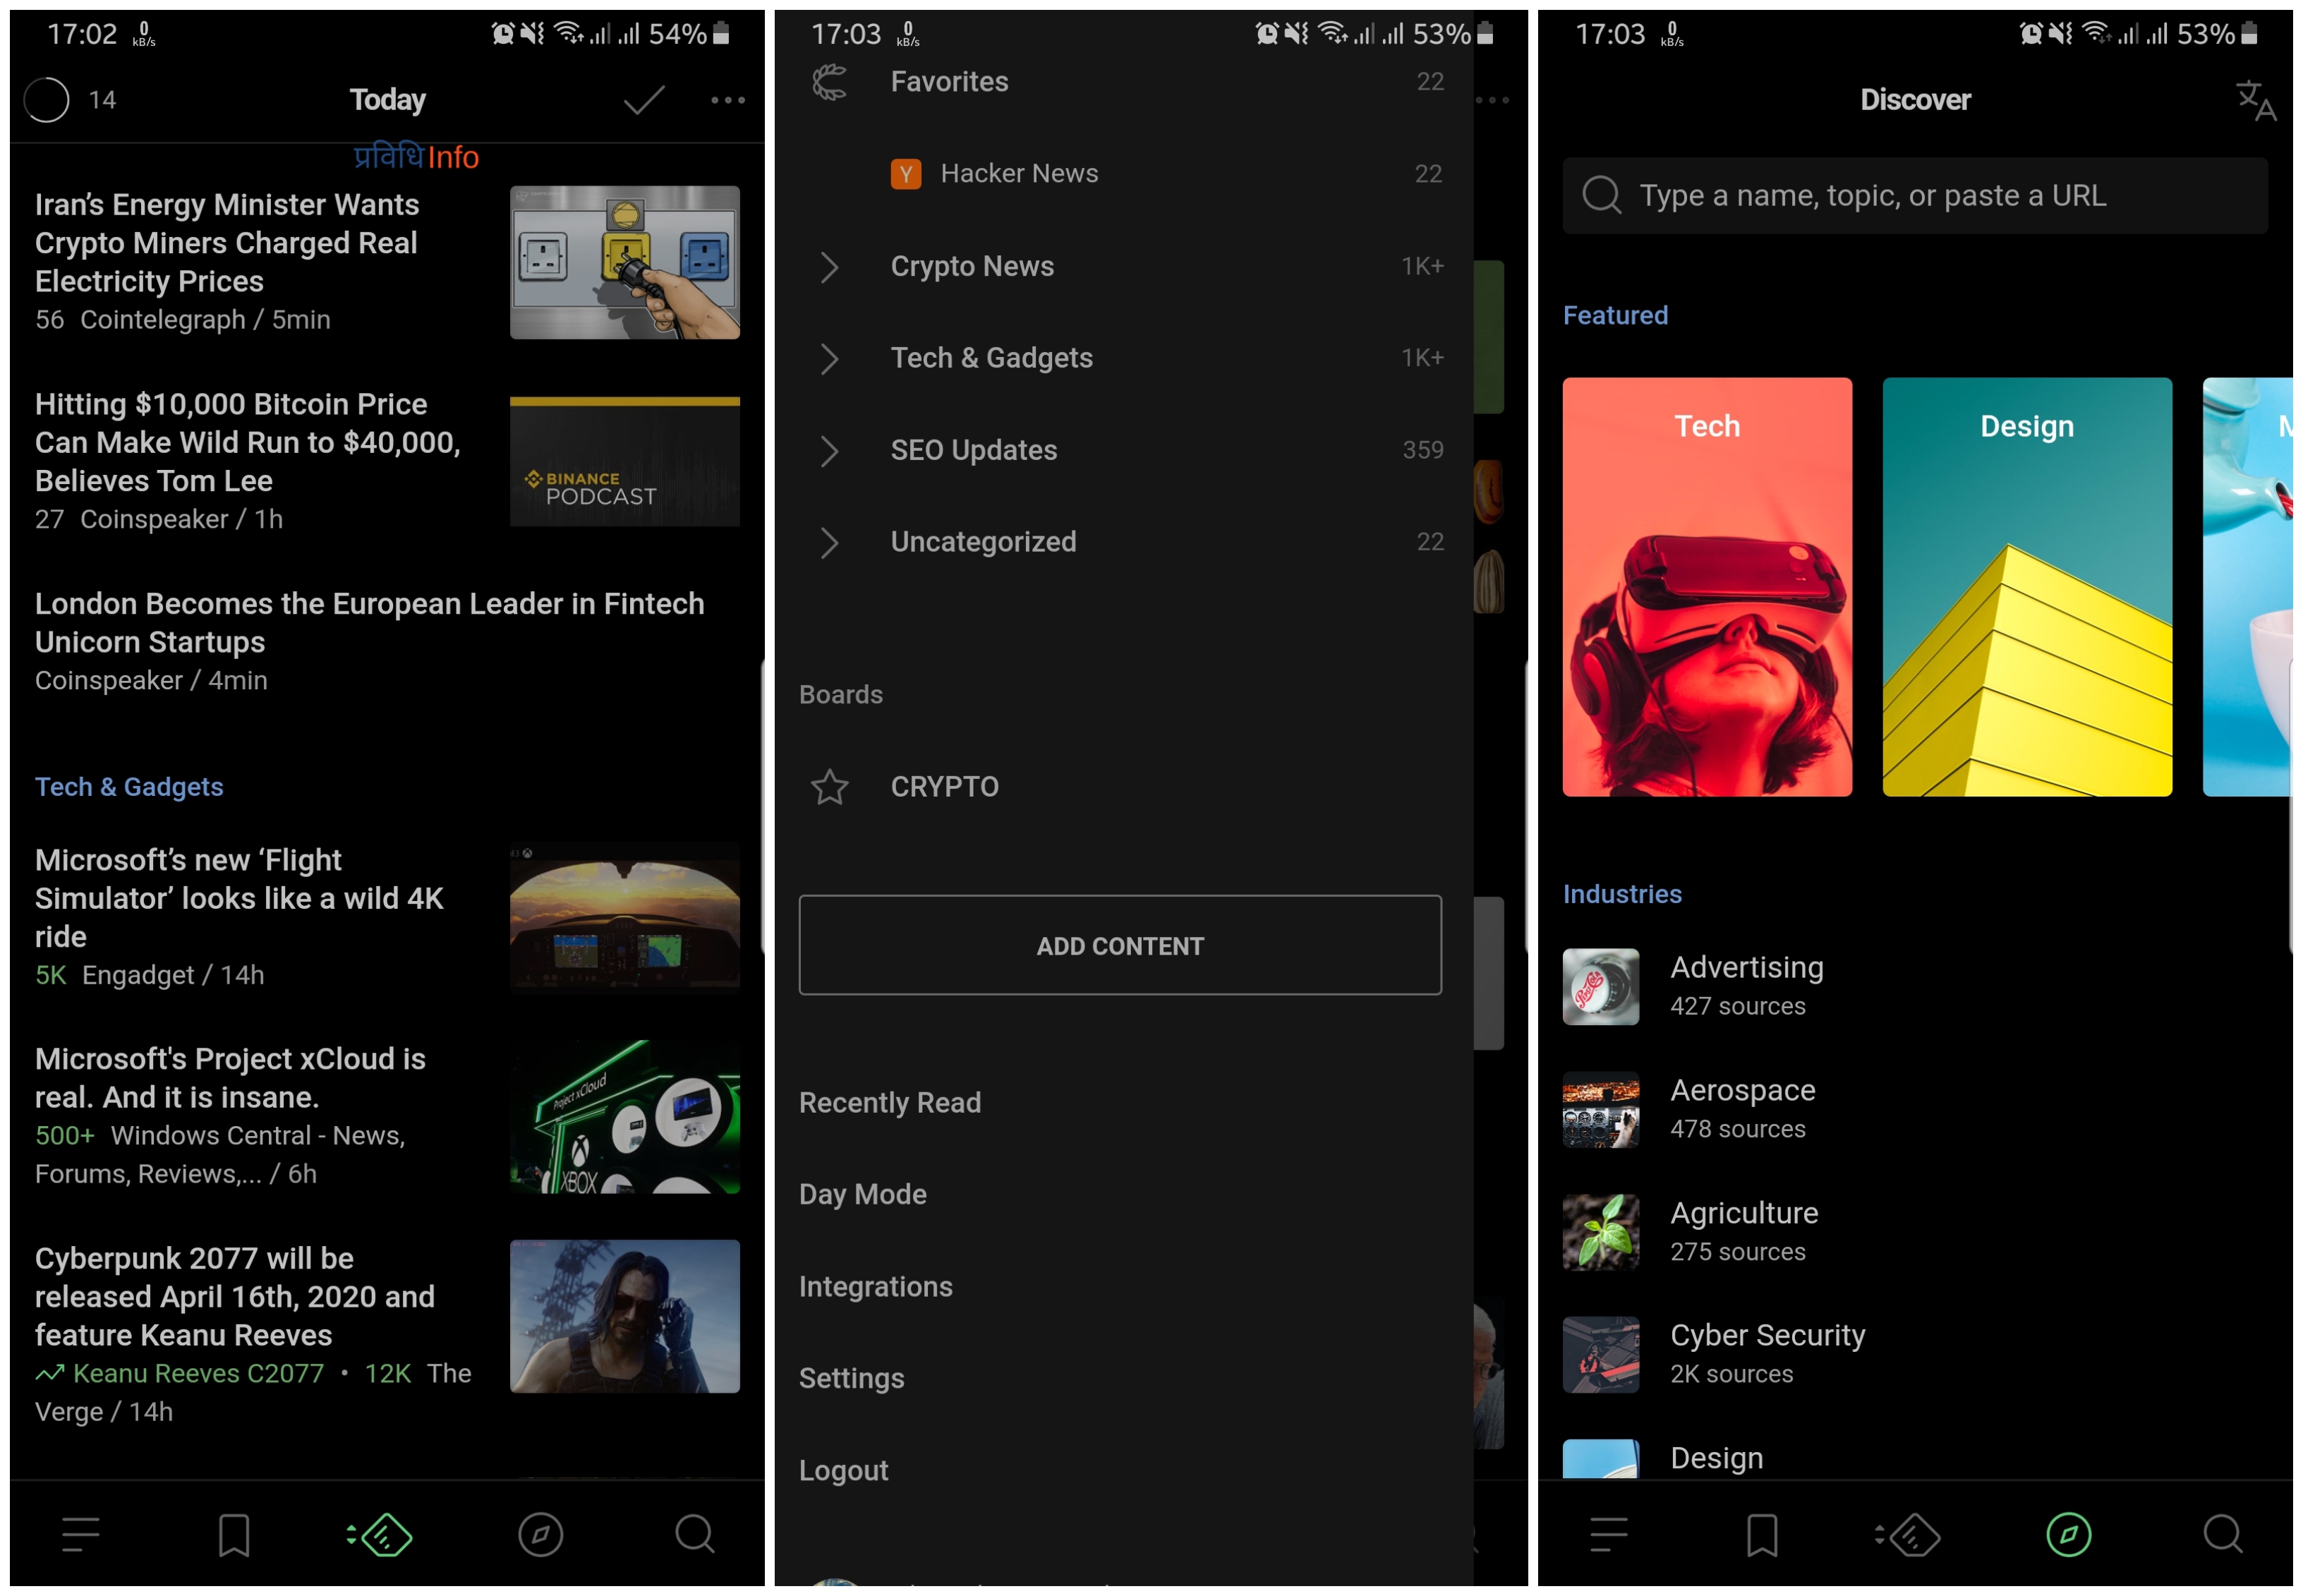 How to enable Dark Mode on Feedly Android